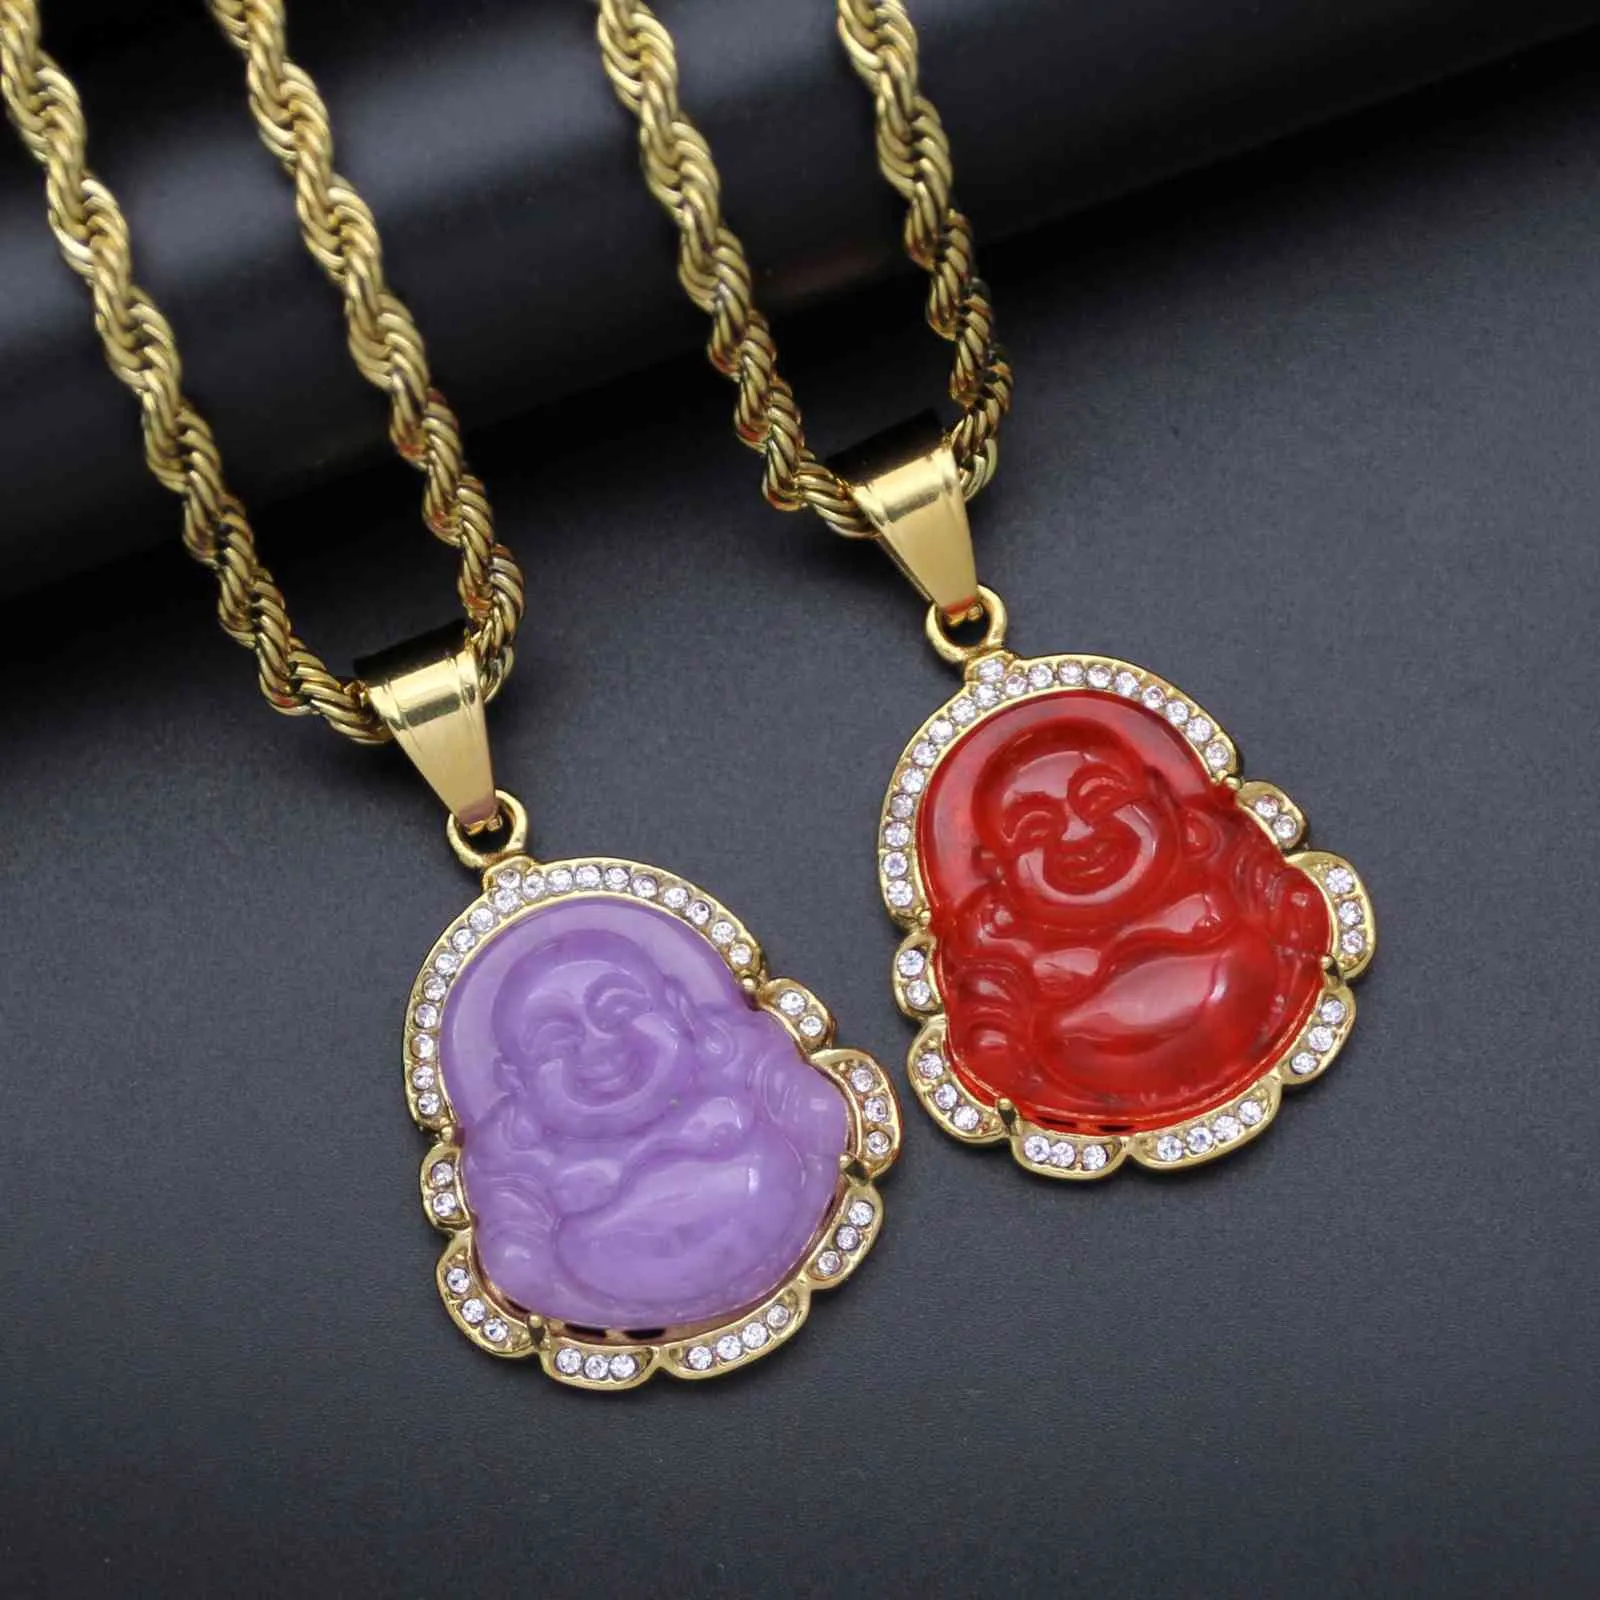 Green Jade Jewelry Laughing Buddha Pendant Chain Necklace For Women Stainless Steel 18k Gold Plated Amulet Accessories Mothers Day4292322